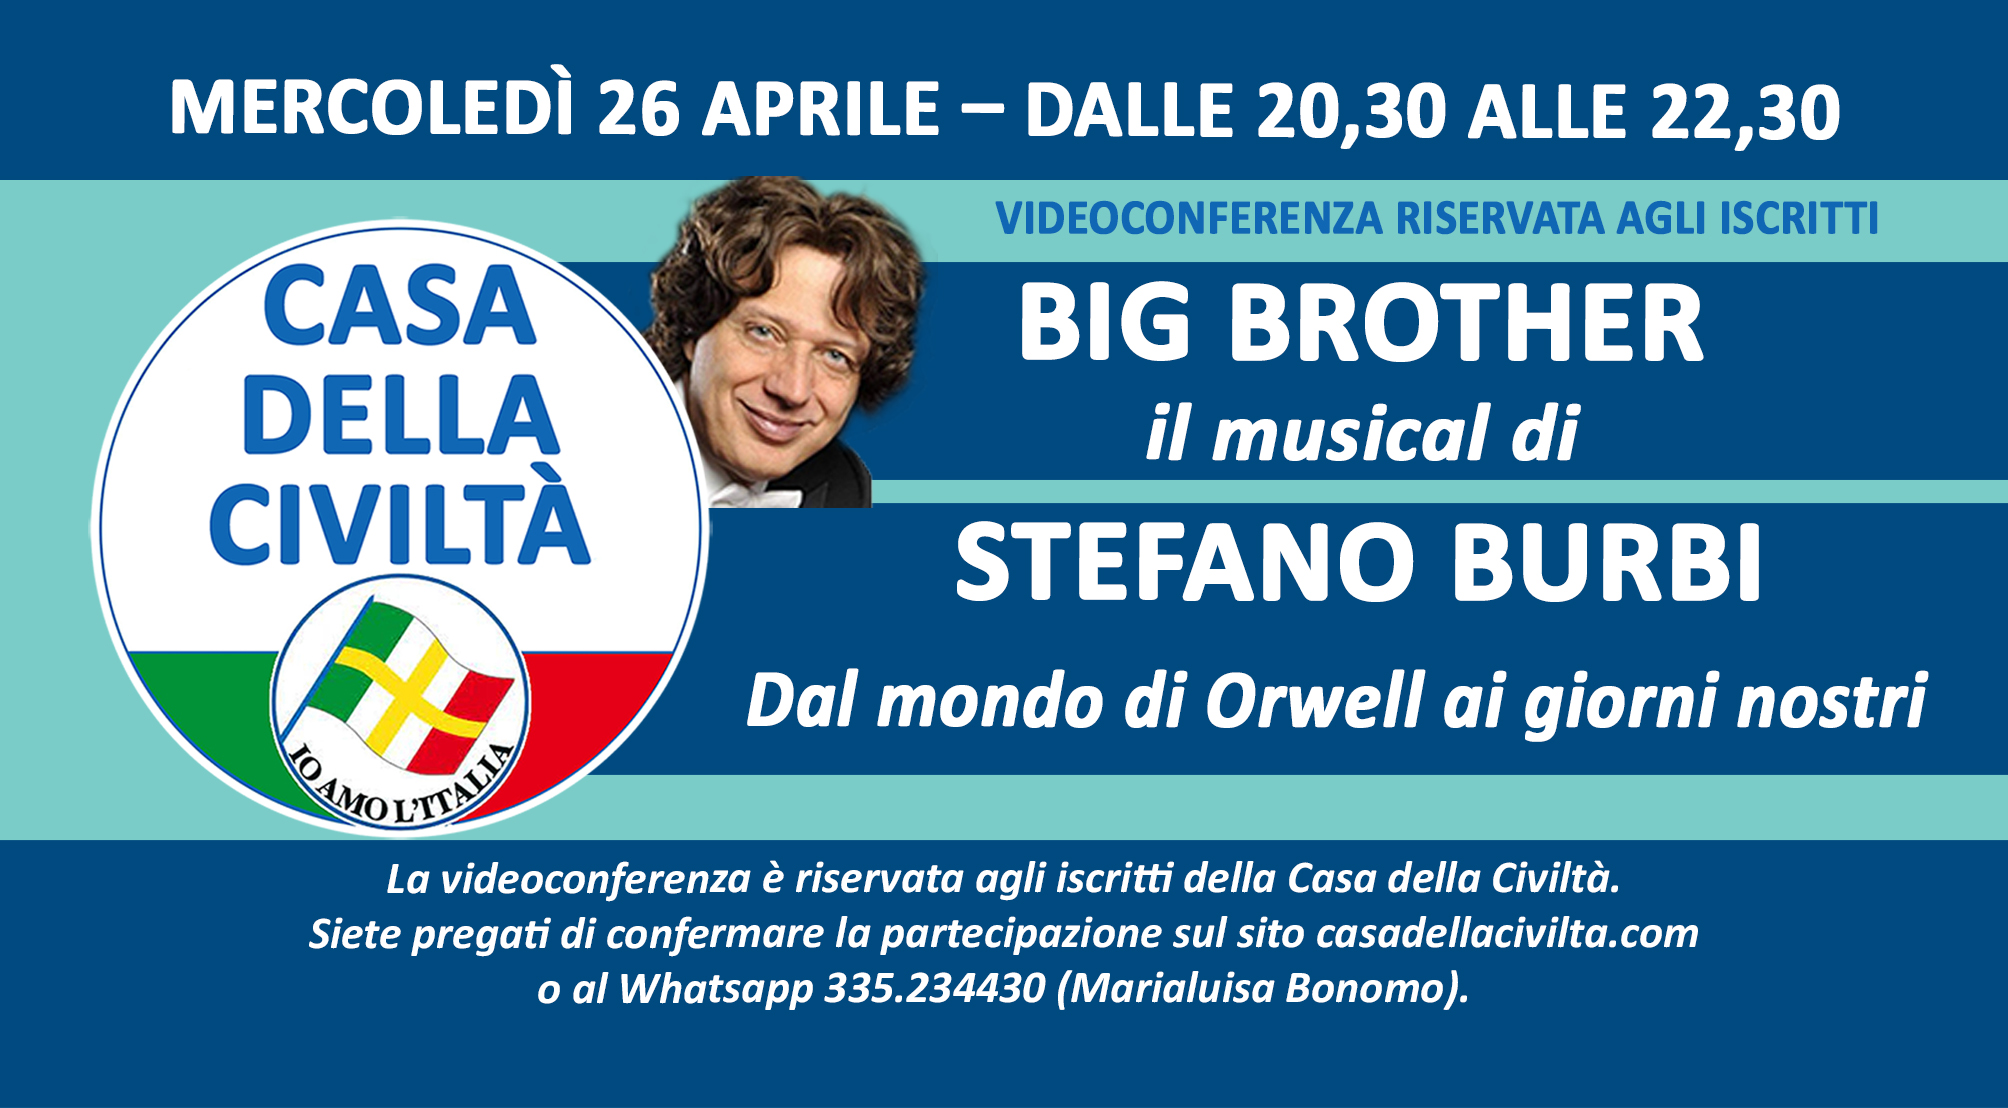 Videoconferenza di <strong>STEFANO BURBI</strong> sul suo Musical <strong>“BIG BROTHER”</strong> (Mercoledì 26 aprile, ore 20,30)”/></a>
                            </div>
                                                <h2 class=